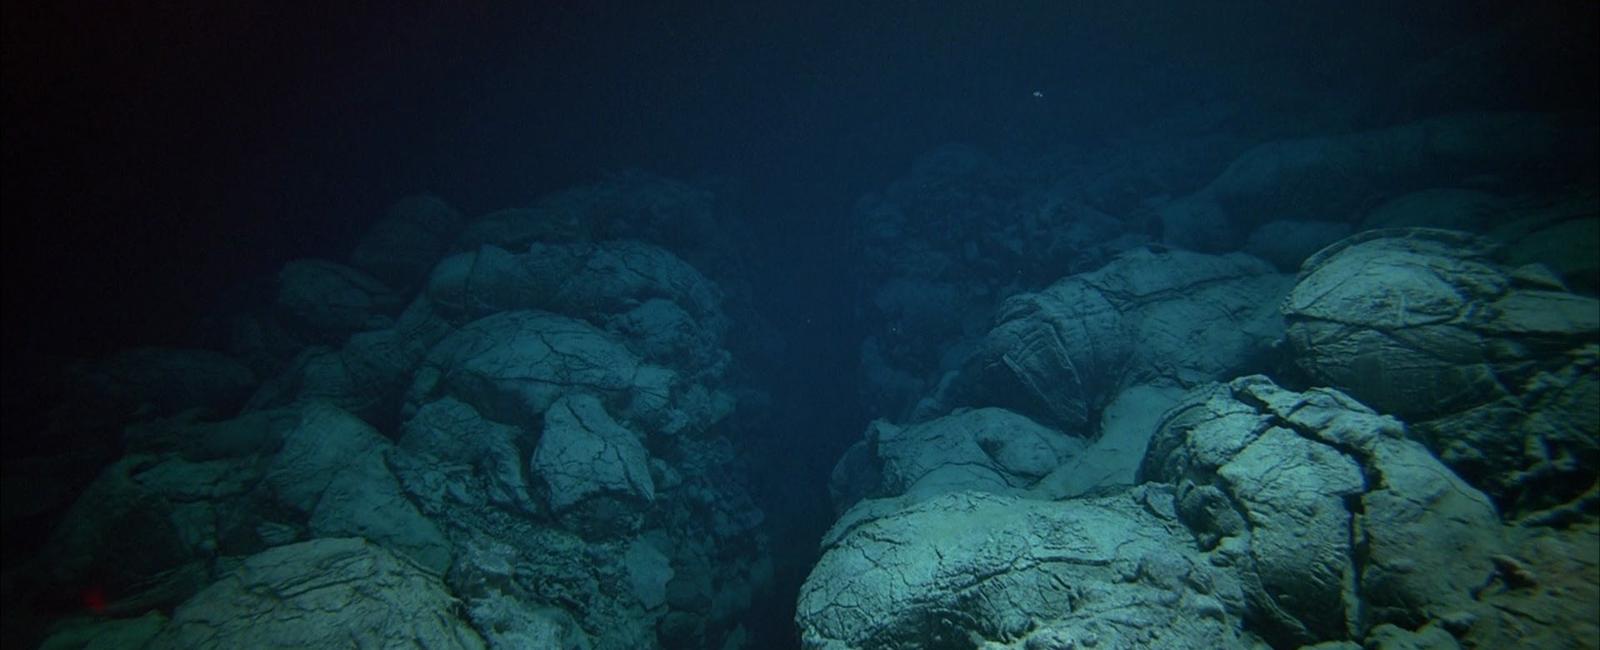 The waters of the marianas trench the deepest part of the ocean is freezing in some parts and scalding hot in others due to water coming out of hypothermal vents